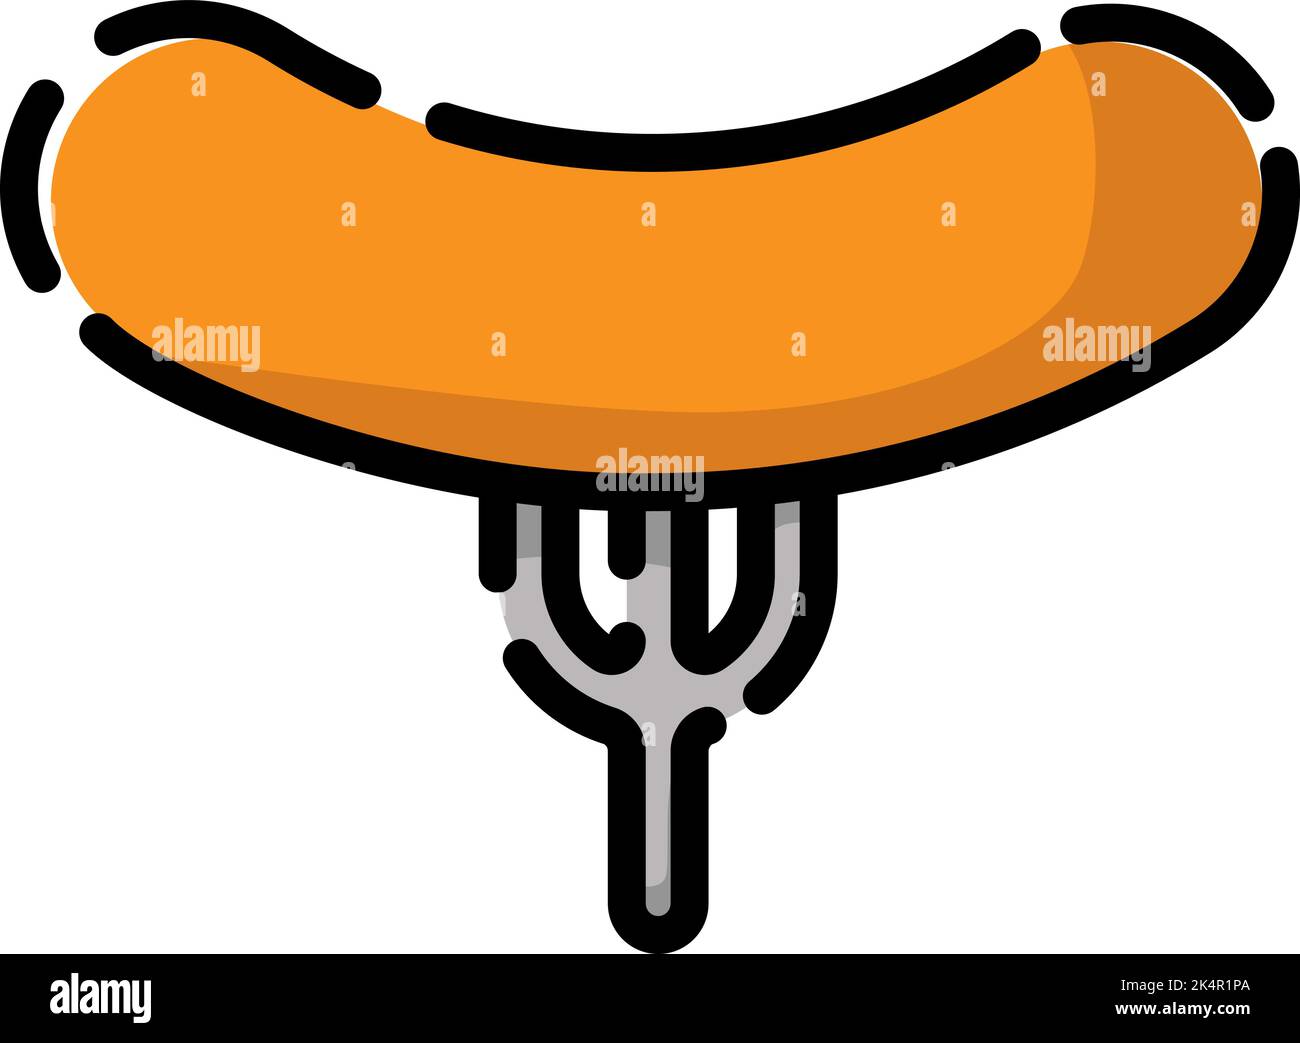 Fried sausage, illustration, vector on a white background. Stock Vector